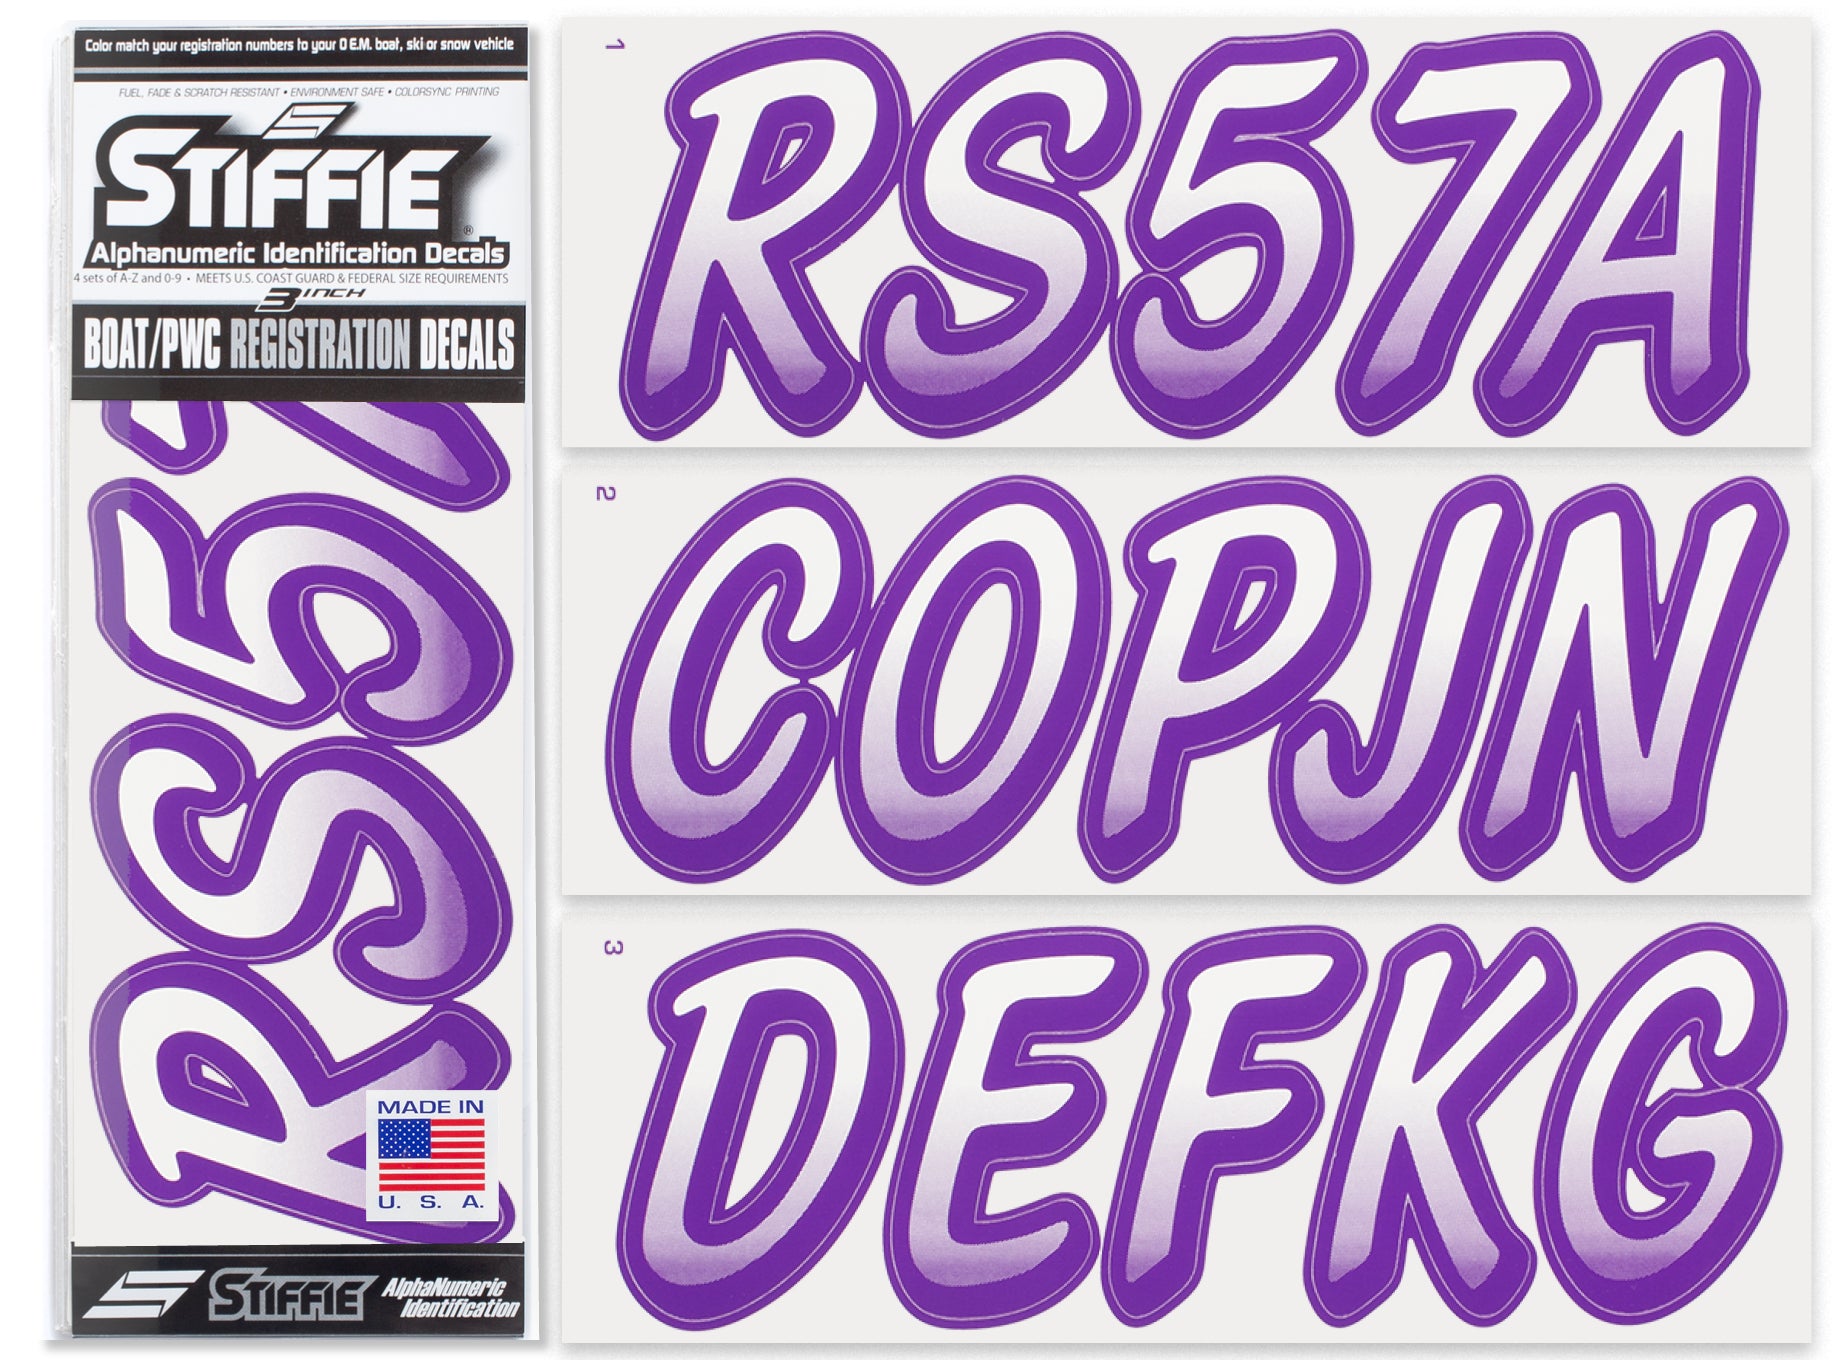 STIFFIE Whipline White/Purple 3" Alpha-Numeric Registration Identification Numbers Stickers Decals for Boats & Personal Watercraft